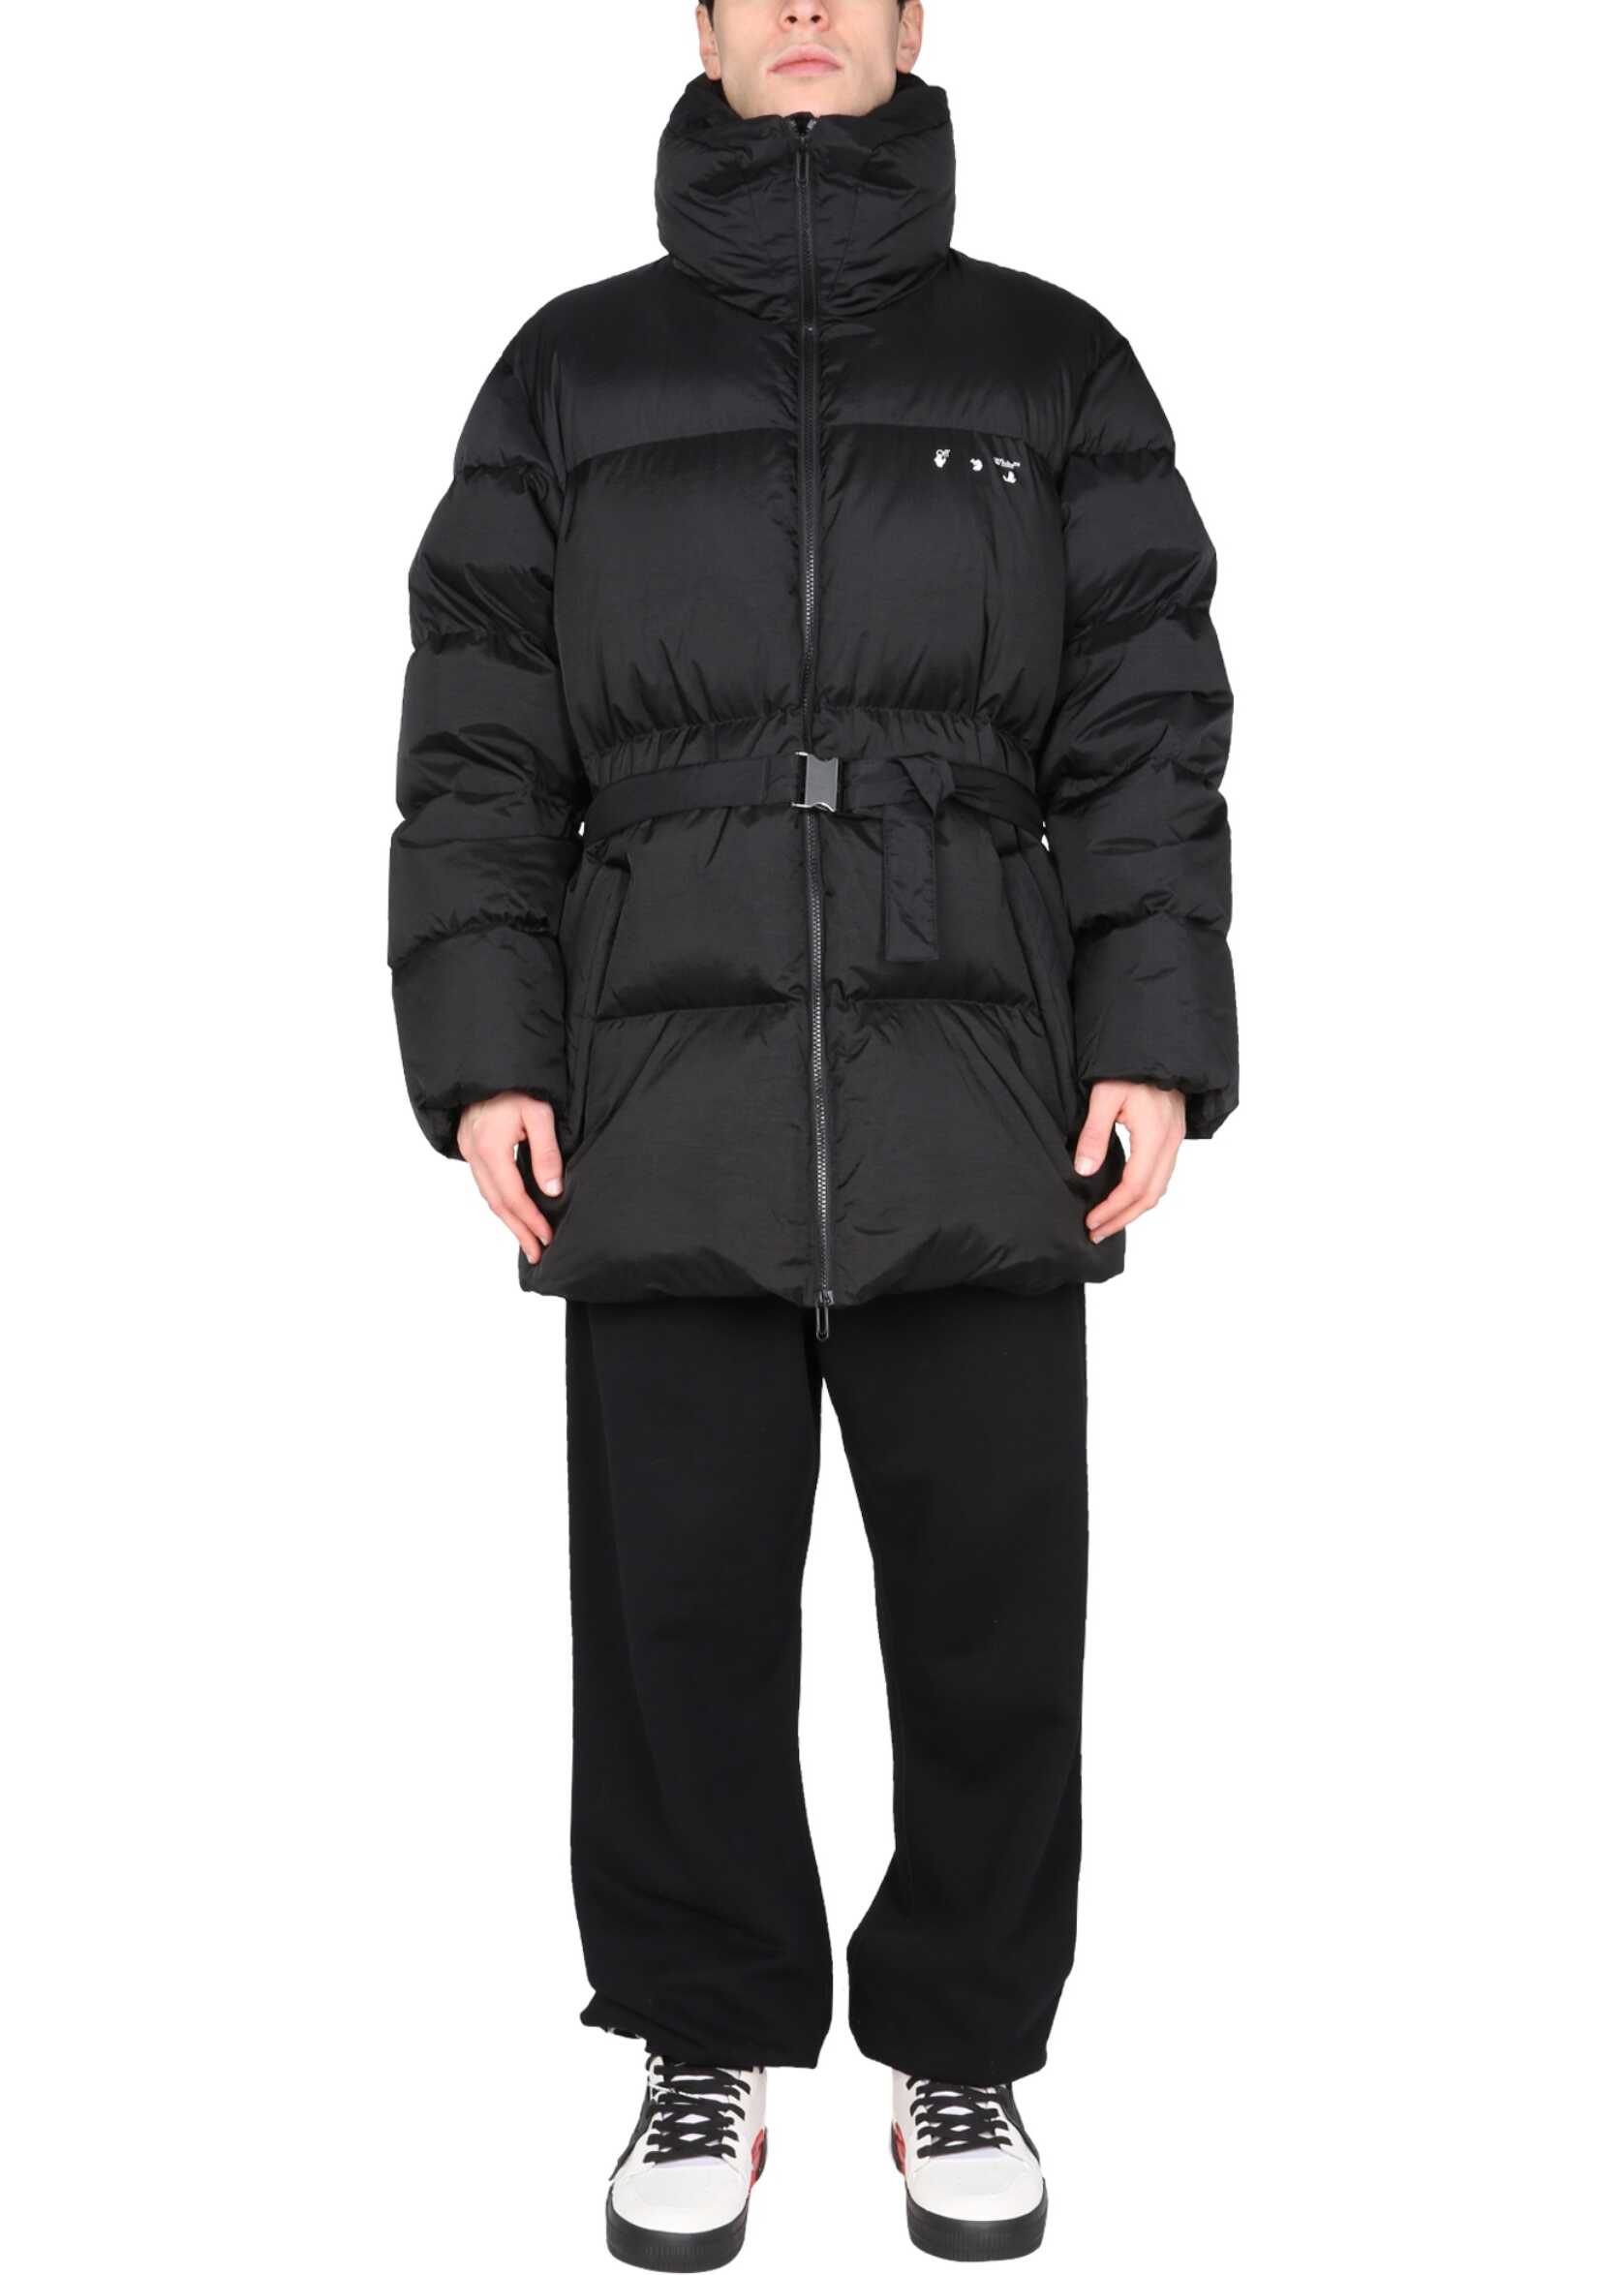 Off-White Hooded Down Jacket OMED029_F21FAB0011001 BLACK image0